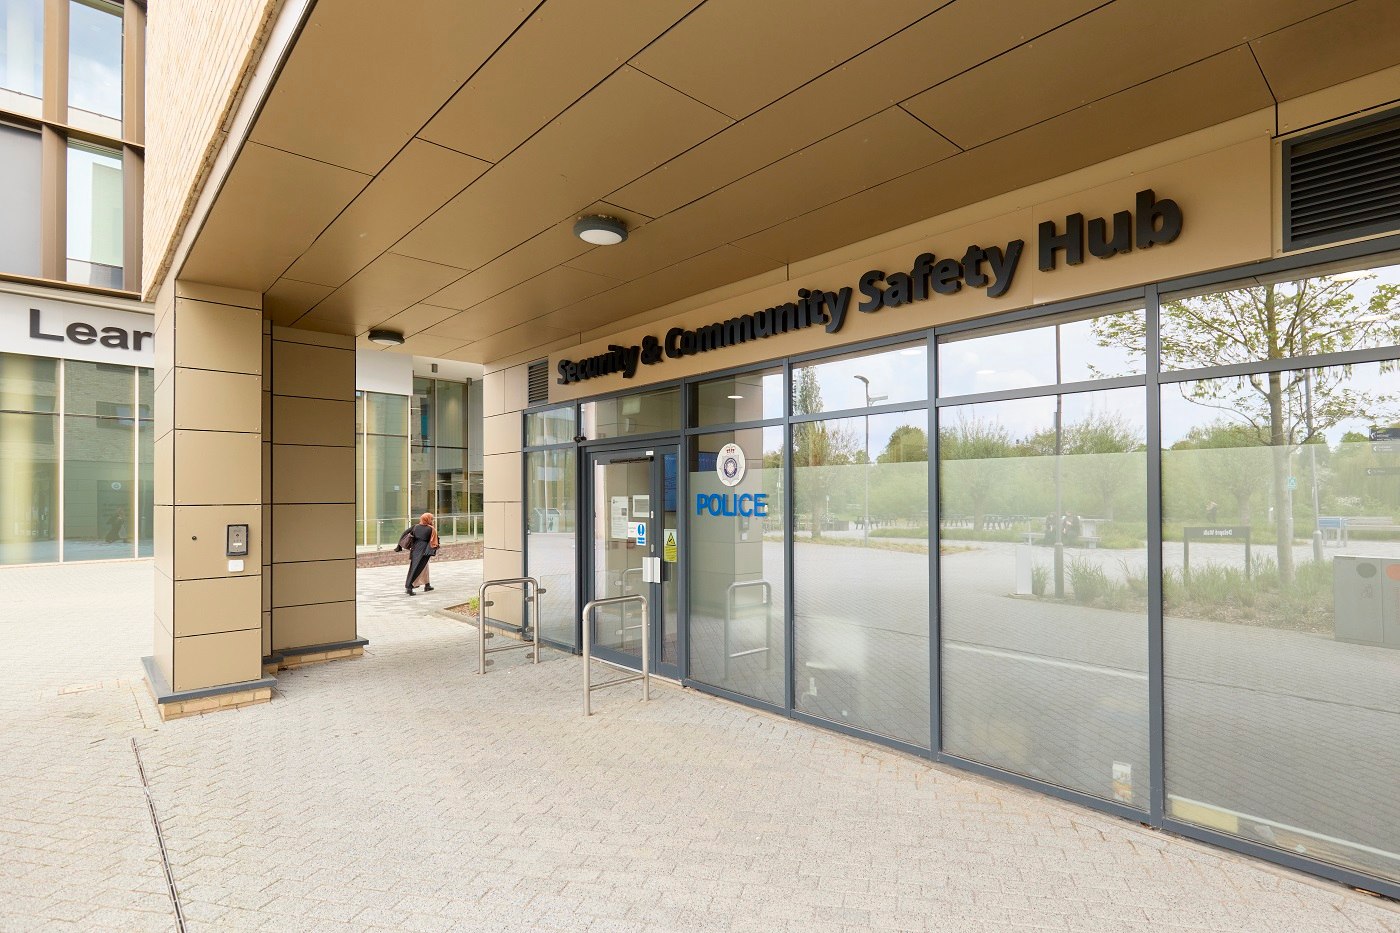 Security and Community Safety Hub on Waterside campus